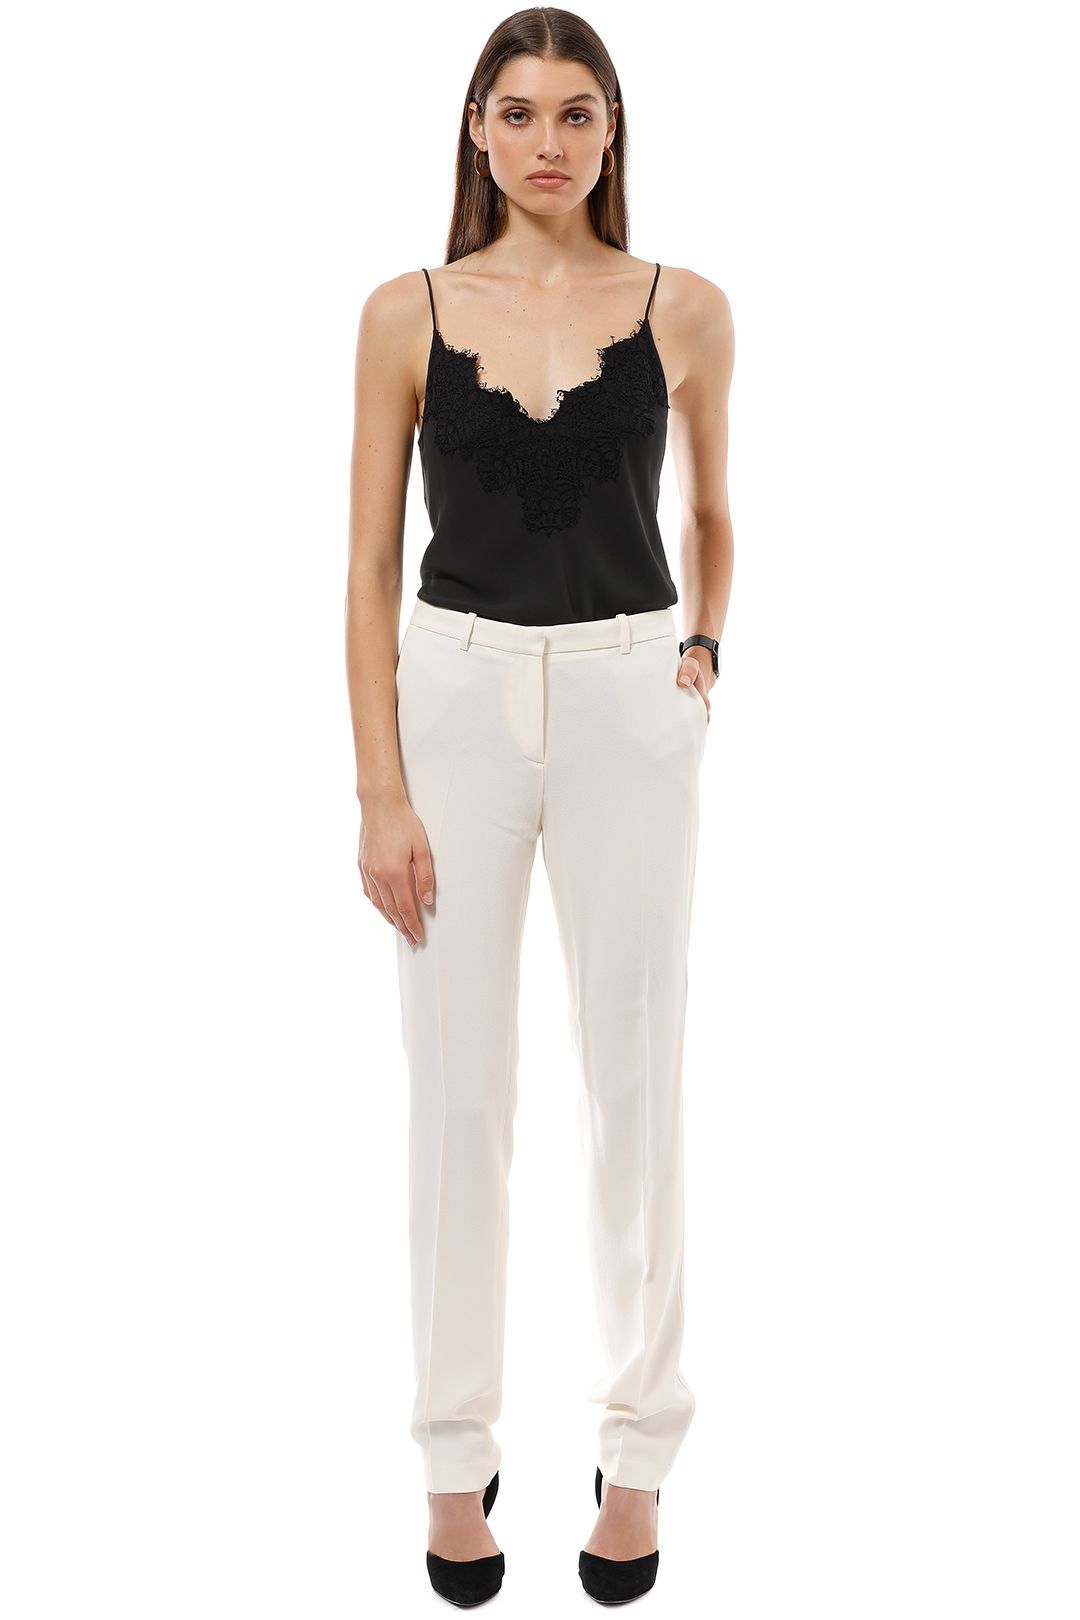 Theory - Elfinis Pant - Ivory - Front